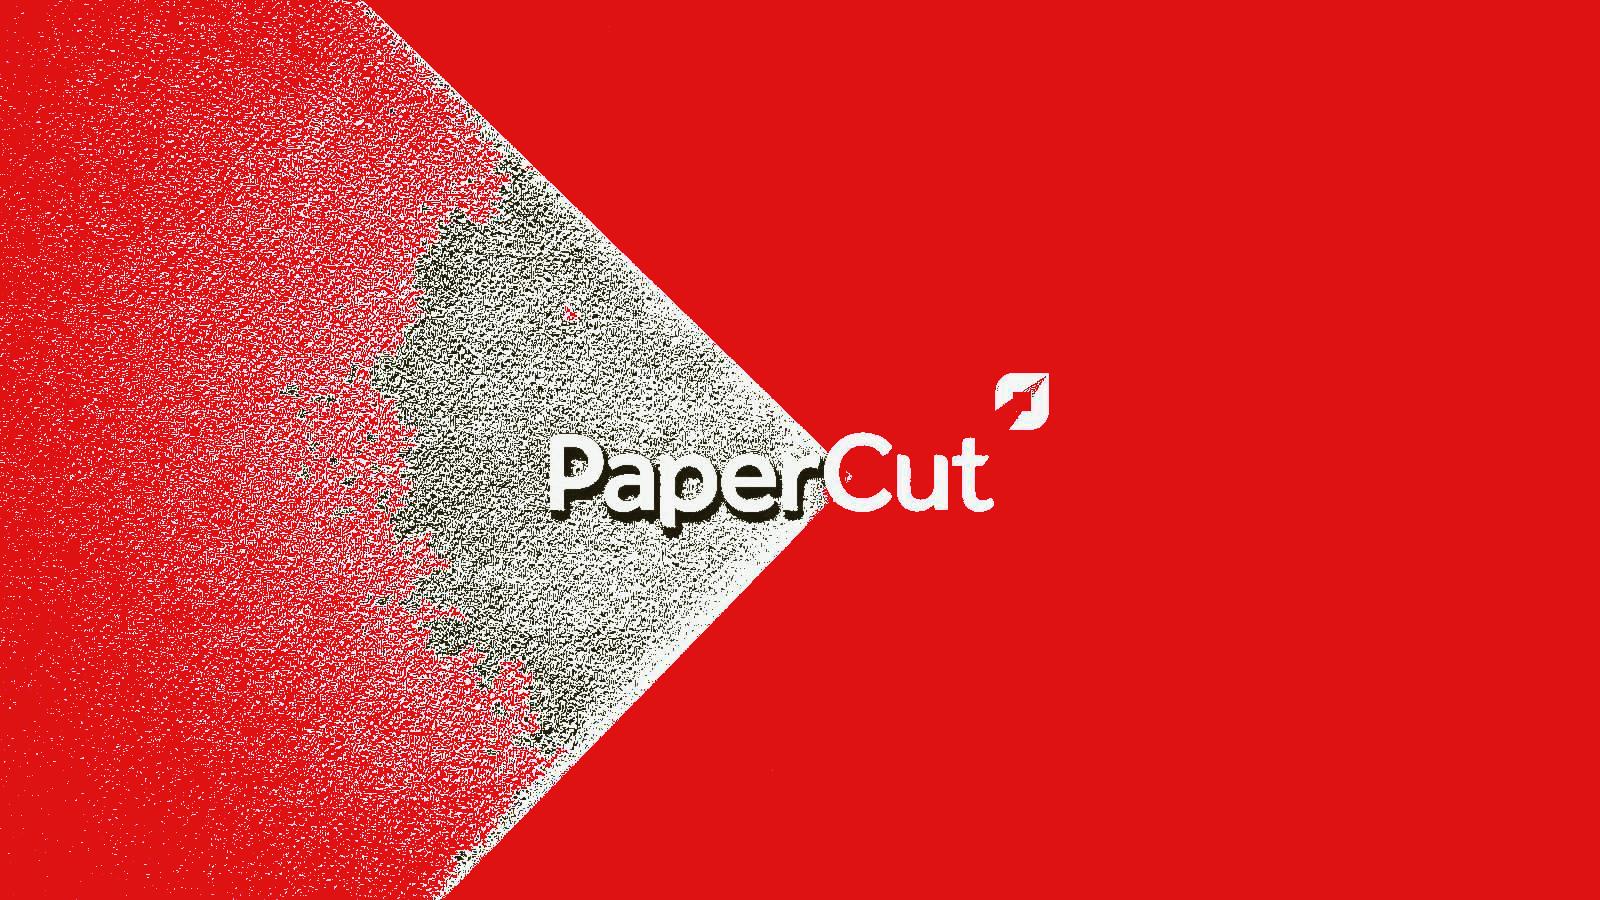 New PaperCut flaw in print management software exposes servers to RCE attacks